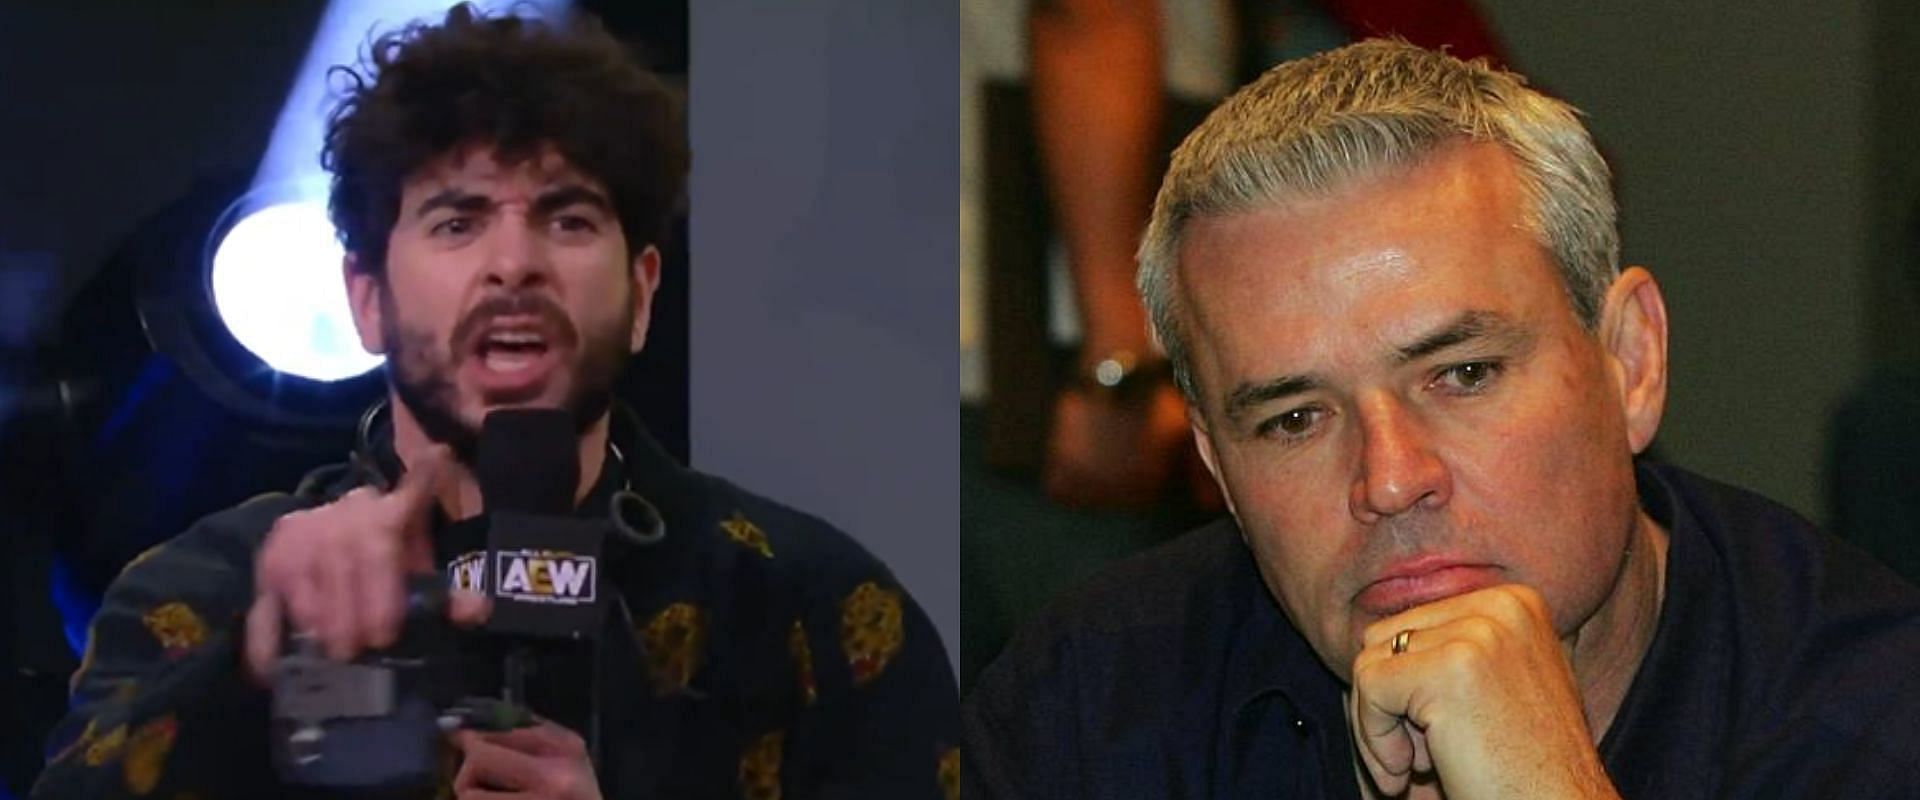 WCW Legend Eric Bischoff expresses his honest opinion to Tony Khan&#039;s comments about the recent WWE releases